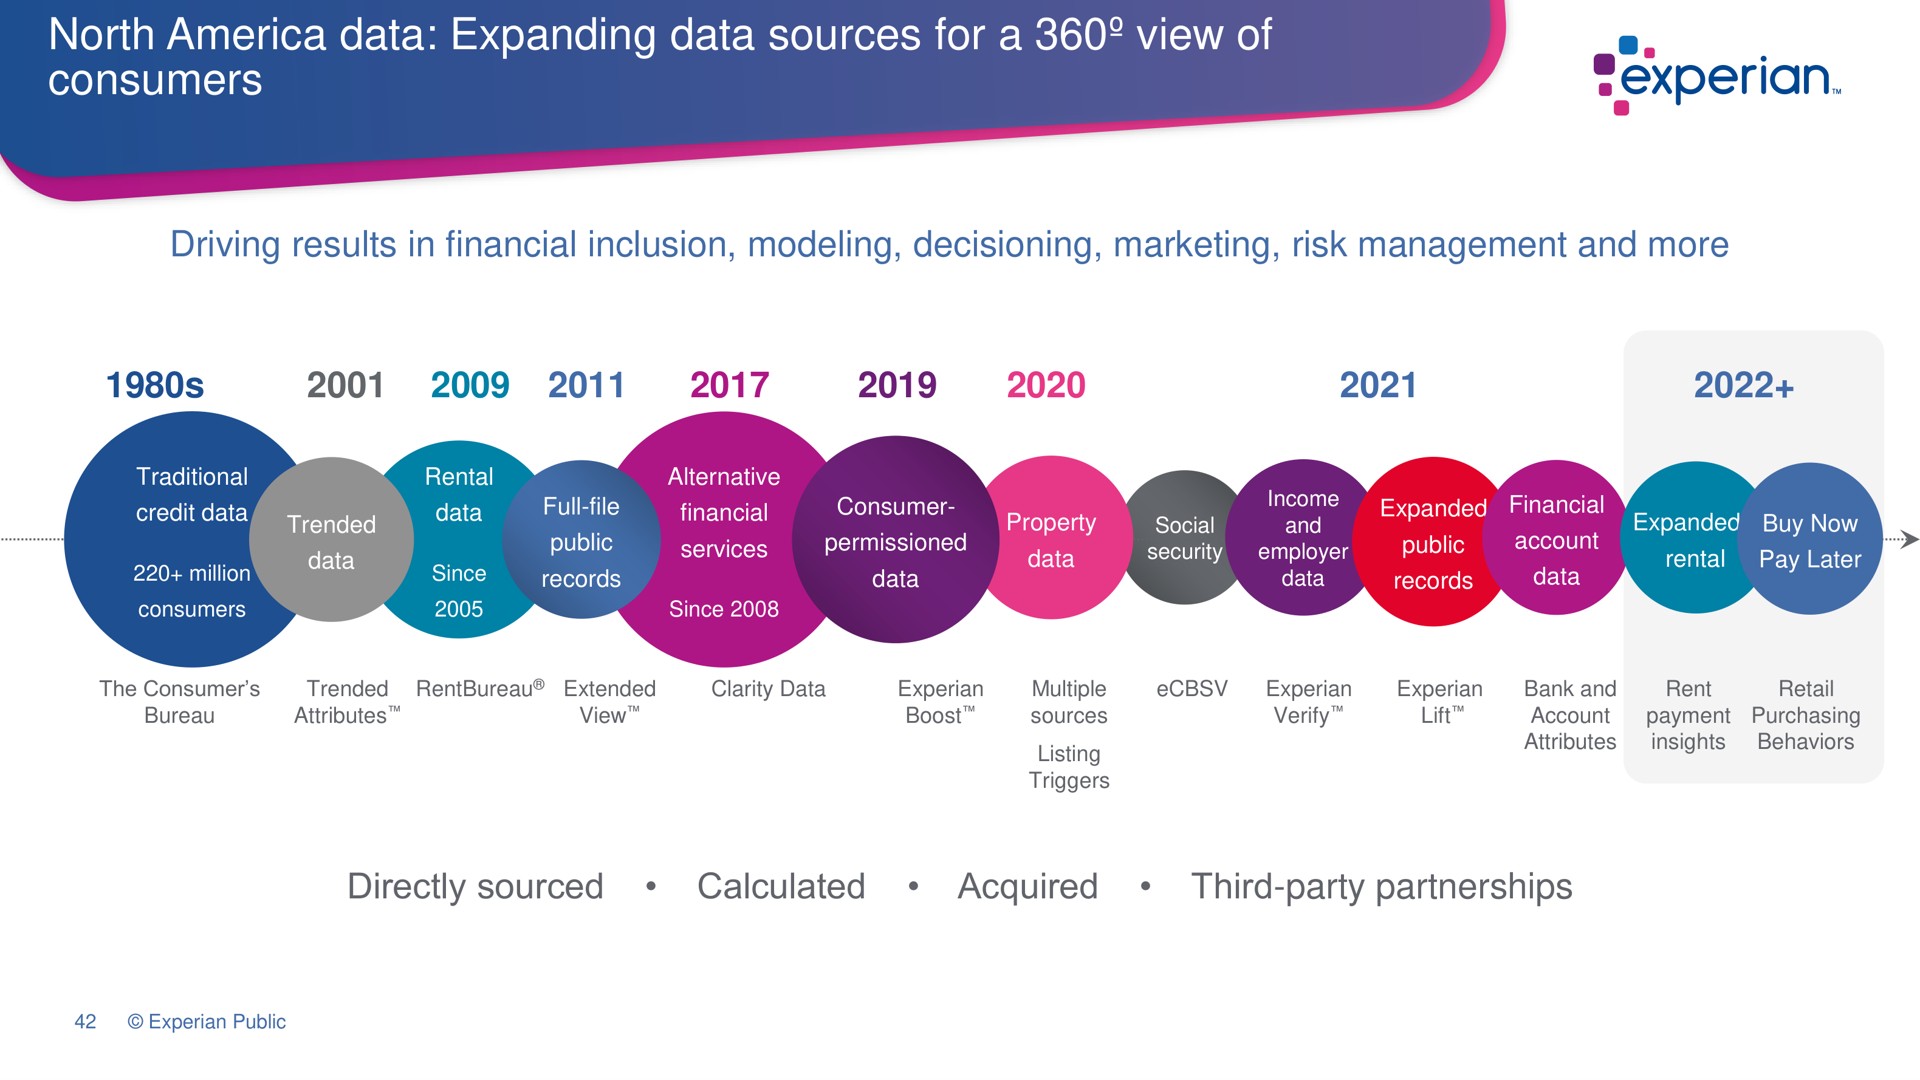 north data expanding data sources for a view of consumers driving results in financial inclusion modeling marketing risk management and more directly sourced calculated acquired third party partnerships | Experian